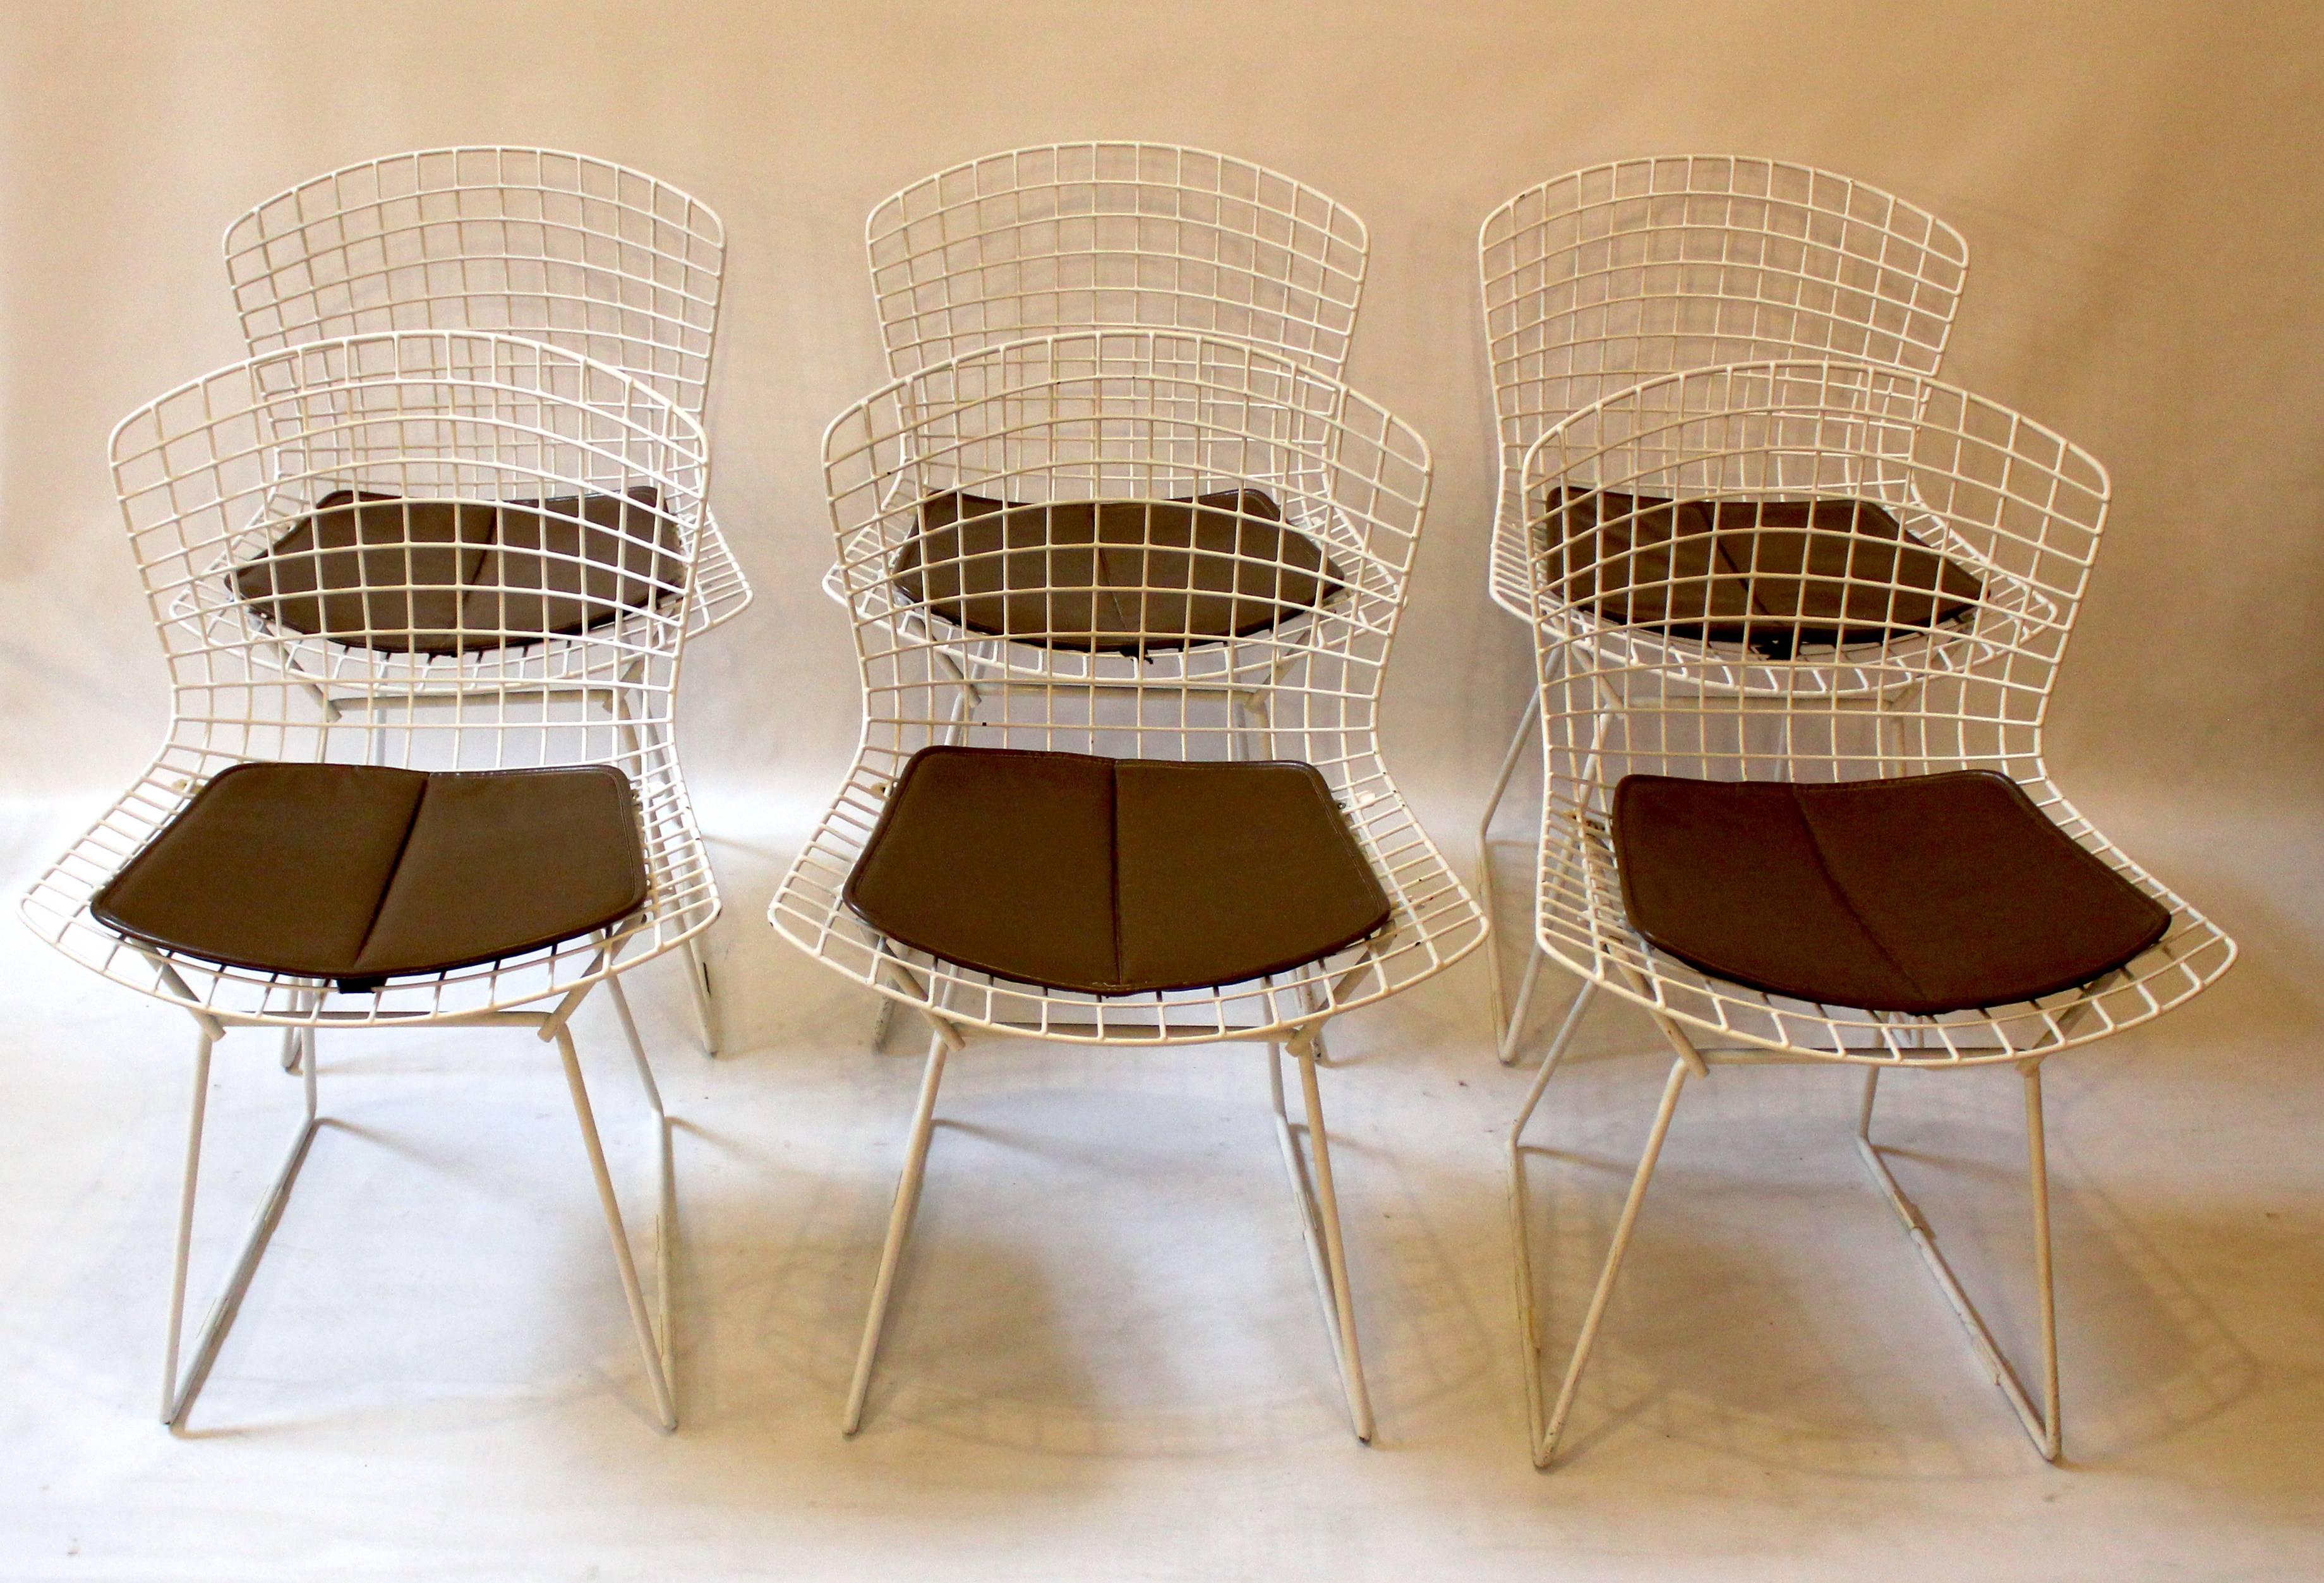 Set of six 1960s wire mesh side chairs by Harry Bertoia for Knoll. Chairs have their original seat pads and most have their original slides. Price is for the set.